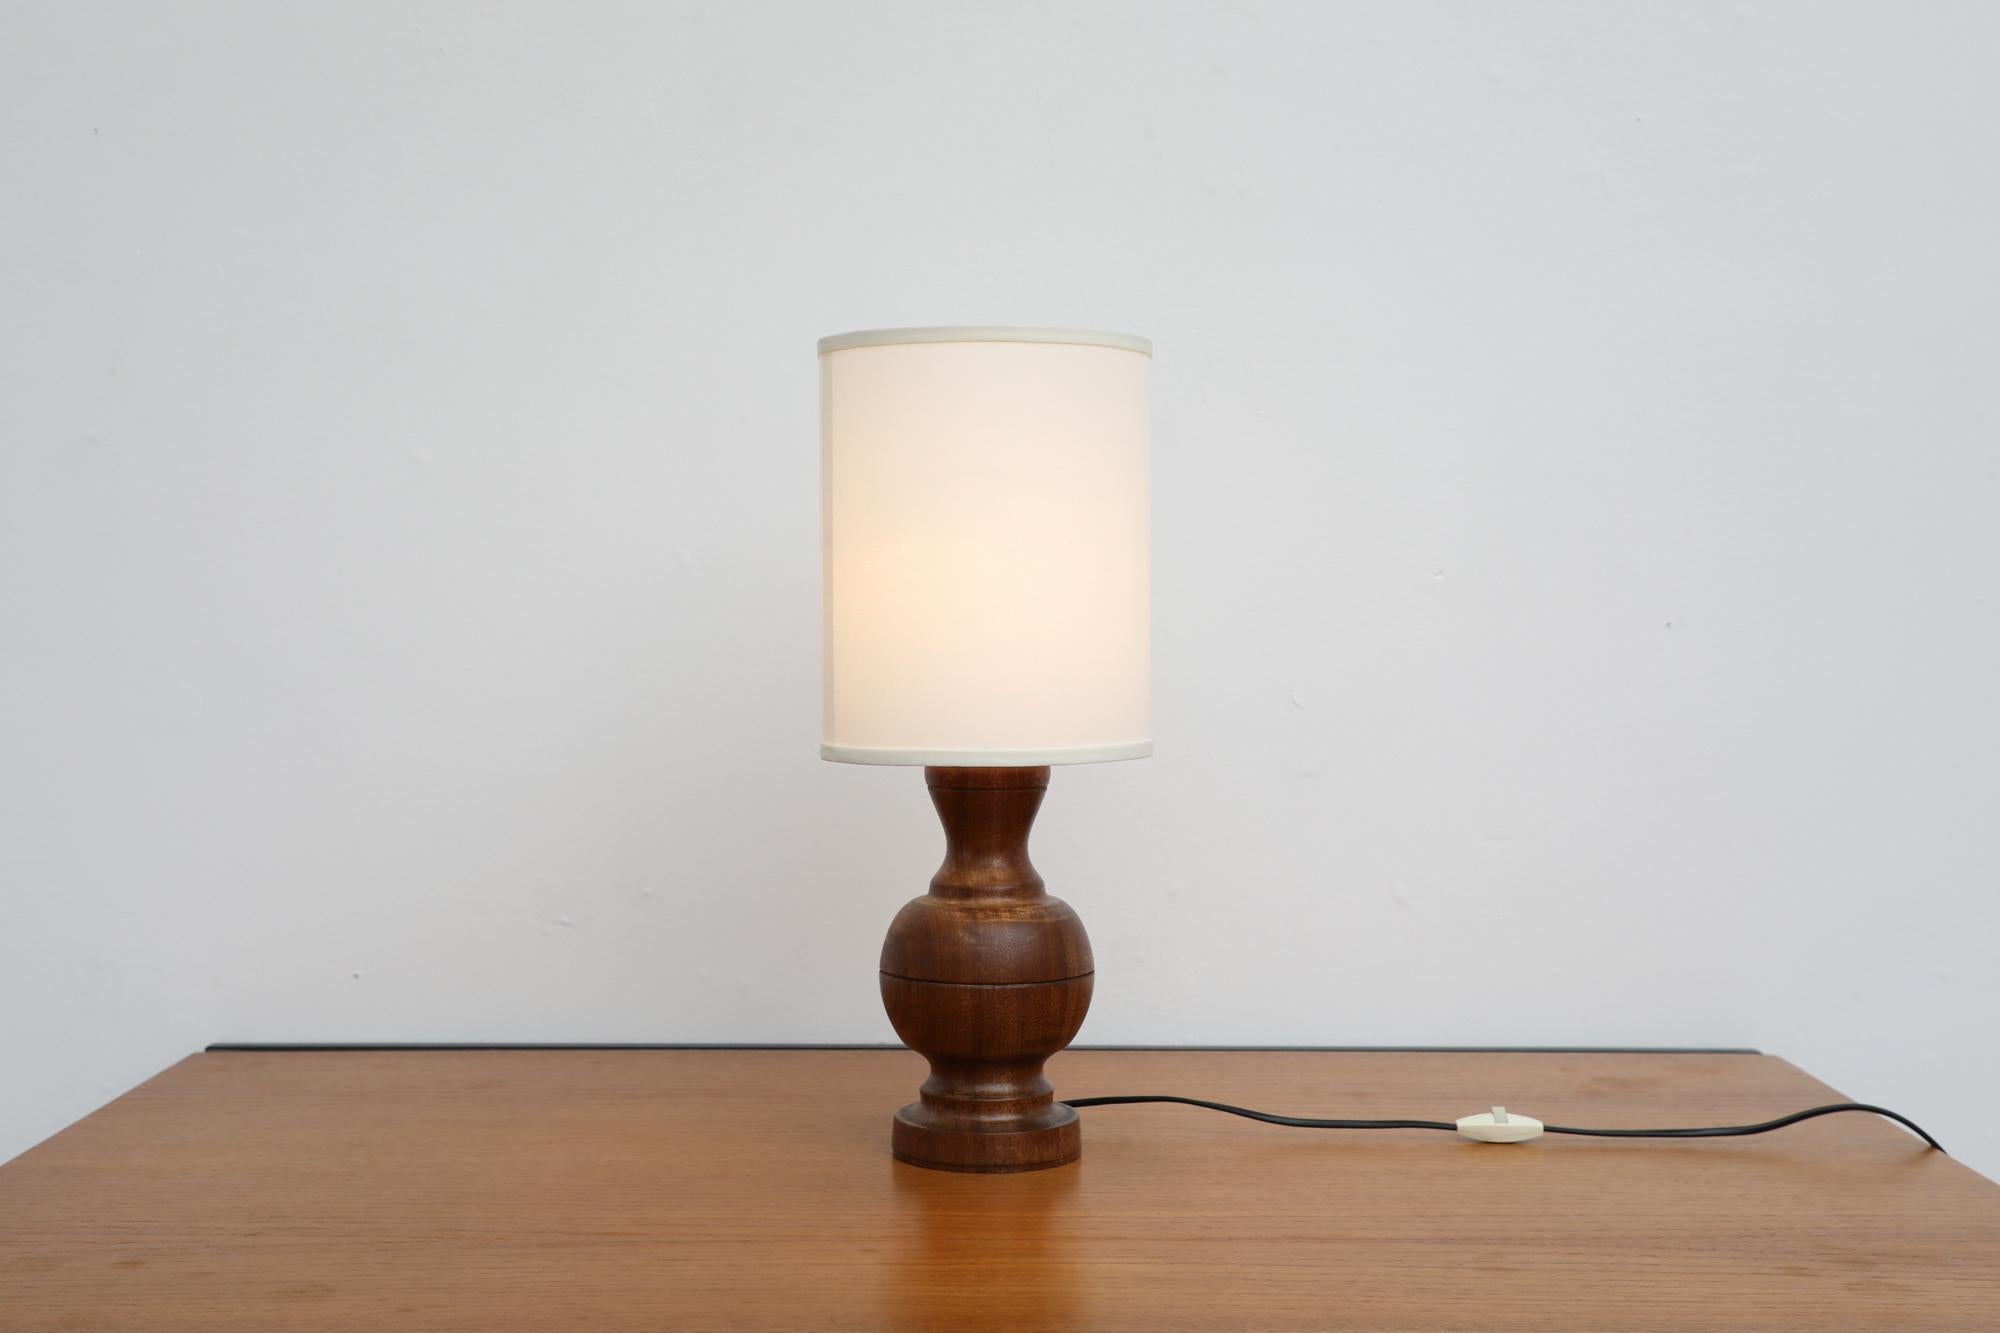 Mid-Century Brutalist table lamp with beautiful hand carved wood base. In the style of Uno Kristiansson. The lamp has a newer linen shade. In otherwise original condition with visible wear consistent with its age and use.